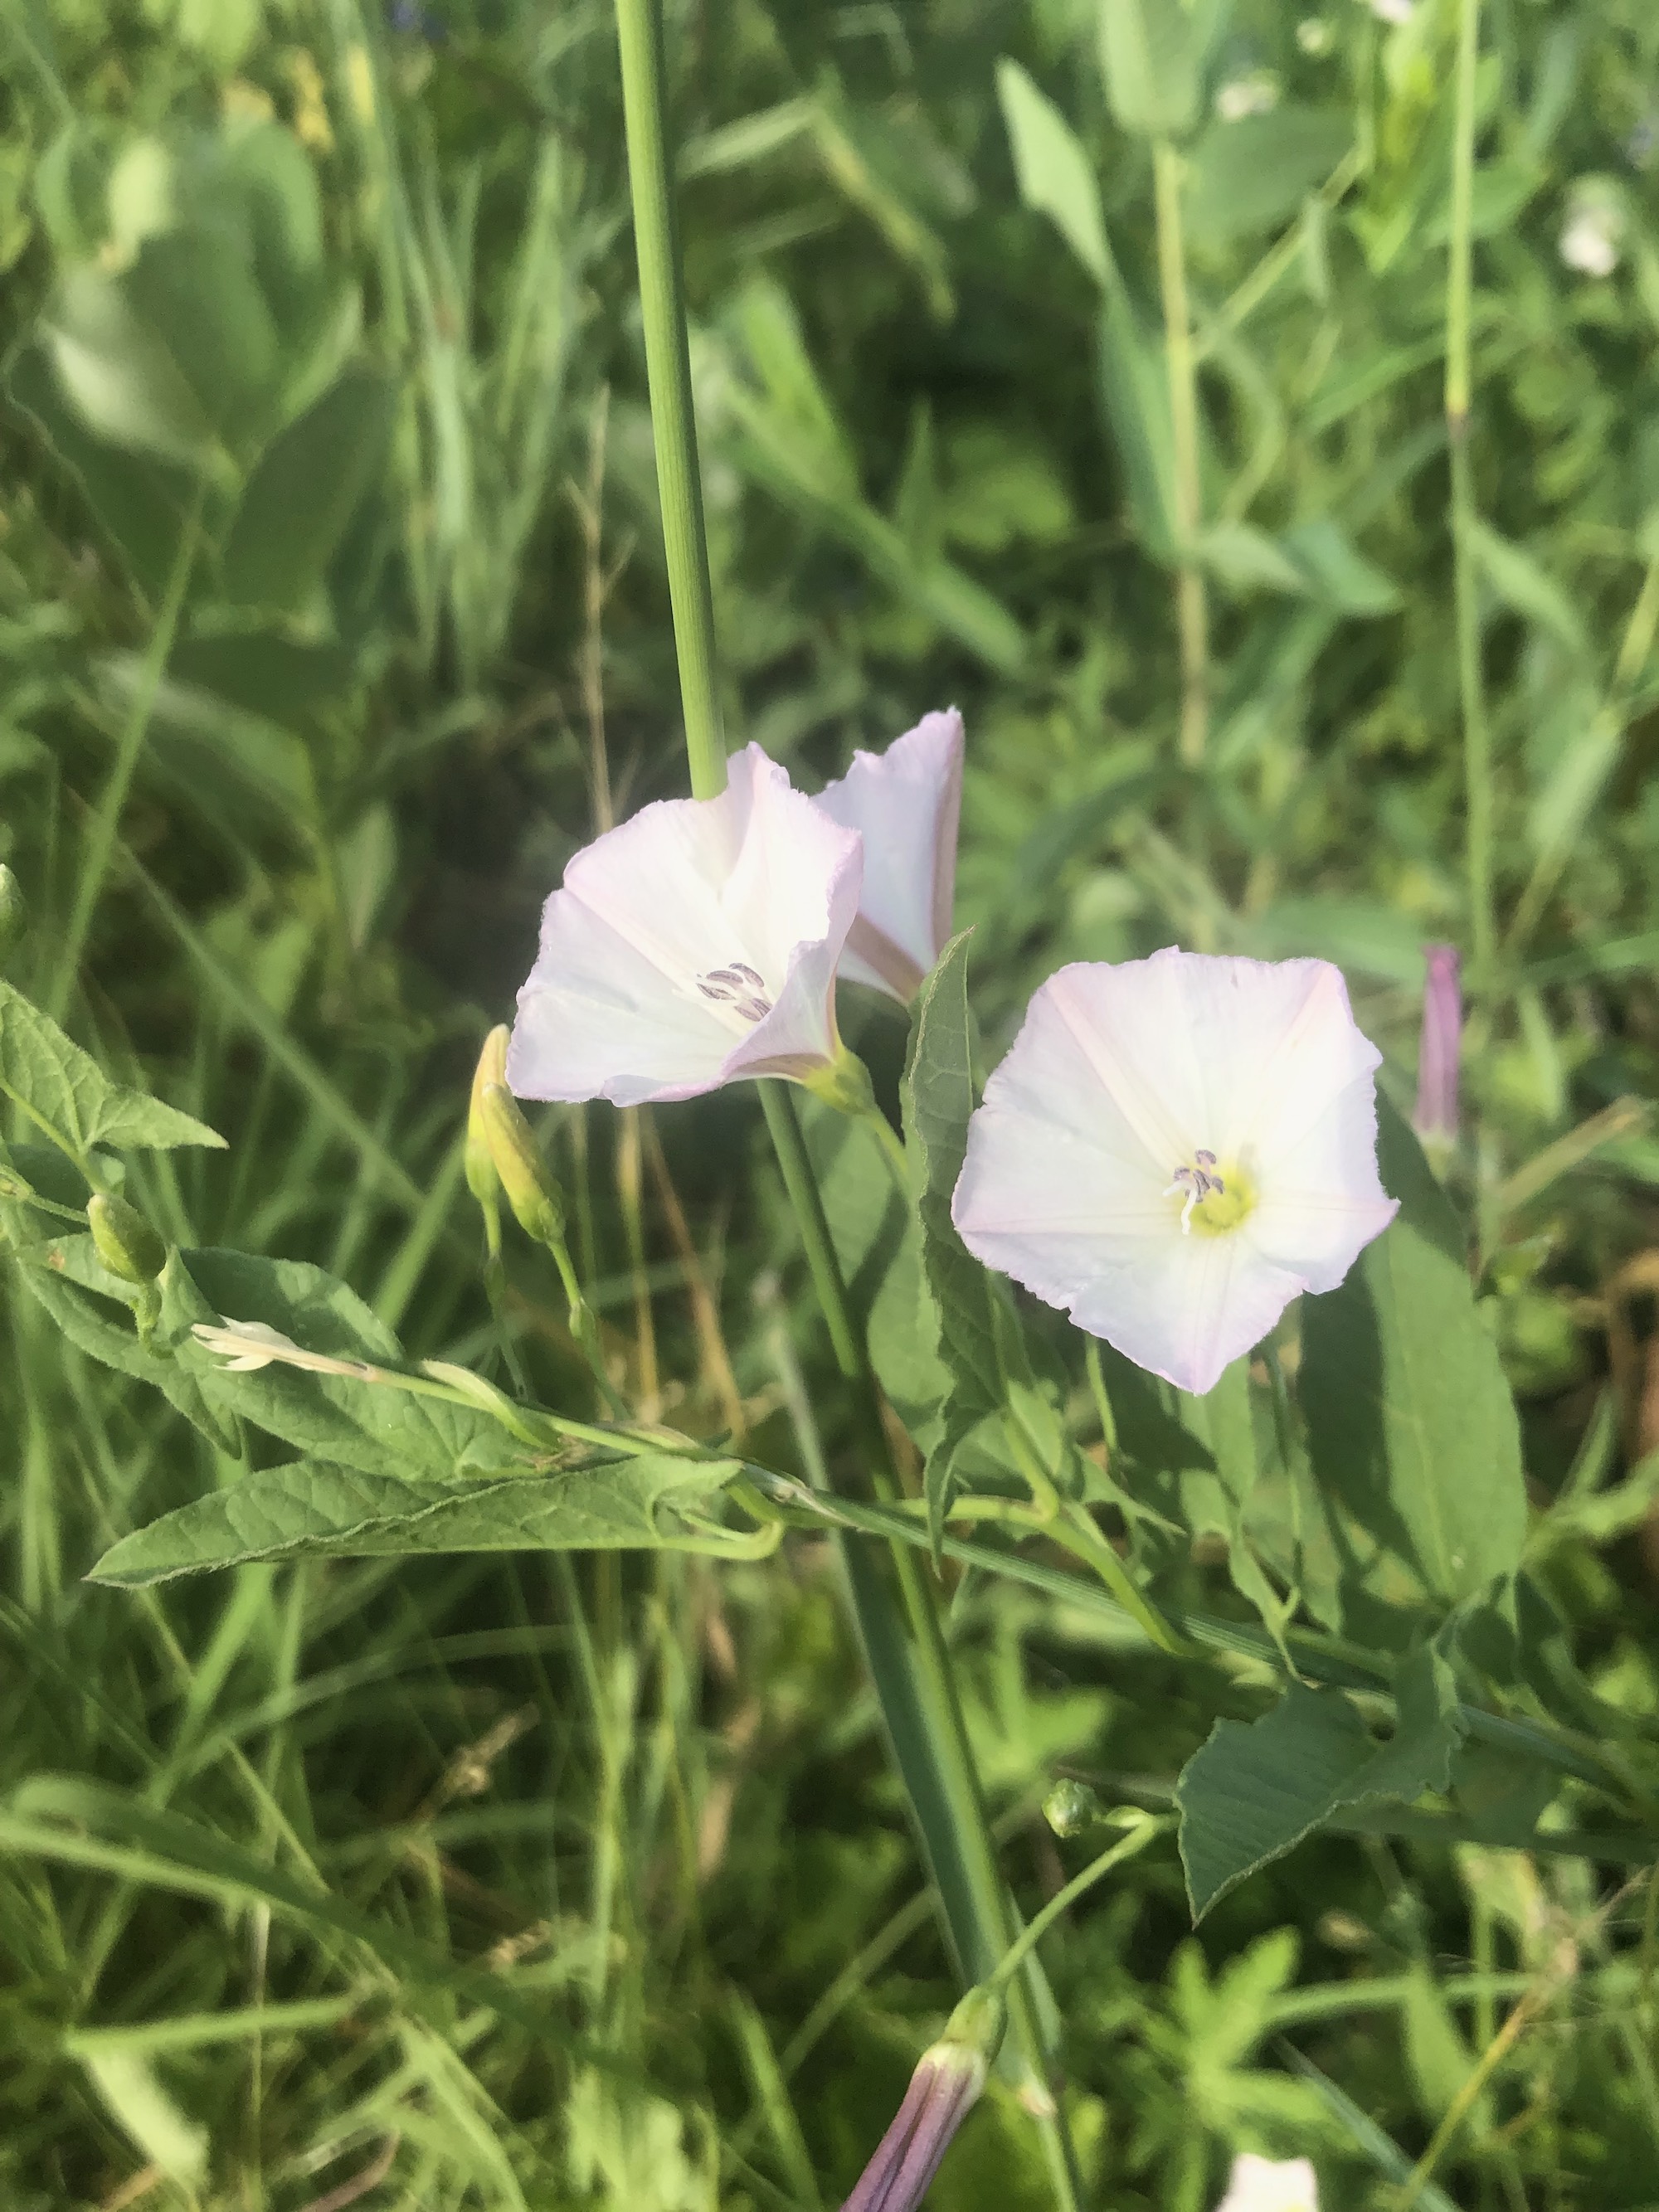 Field Bindweed on shore of Marion Dunn Pond in Madison, Wisconsin on June 15, 2021.